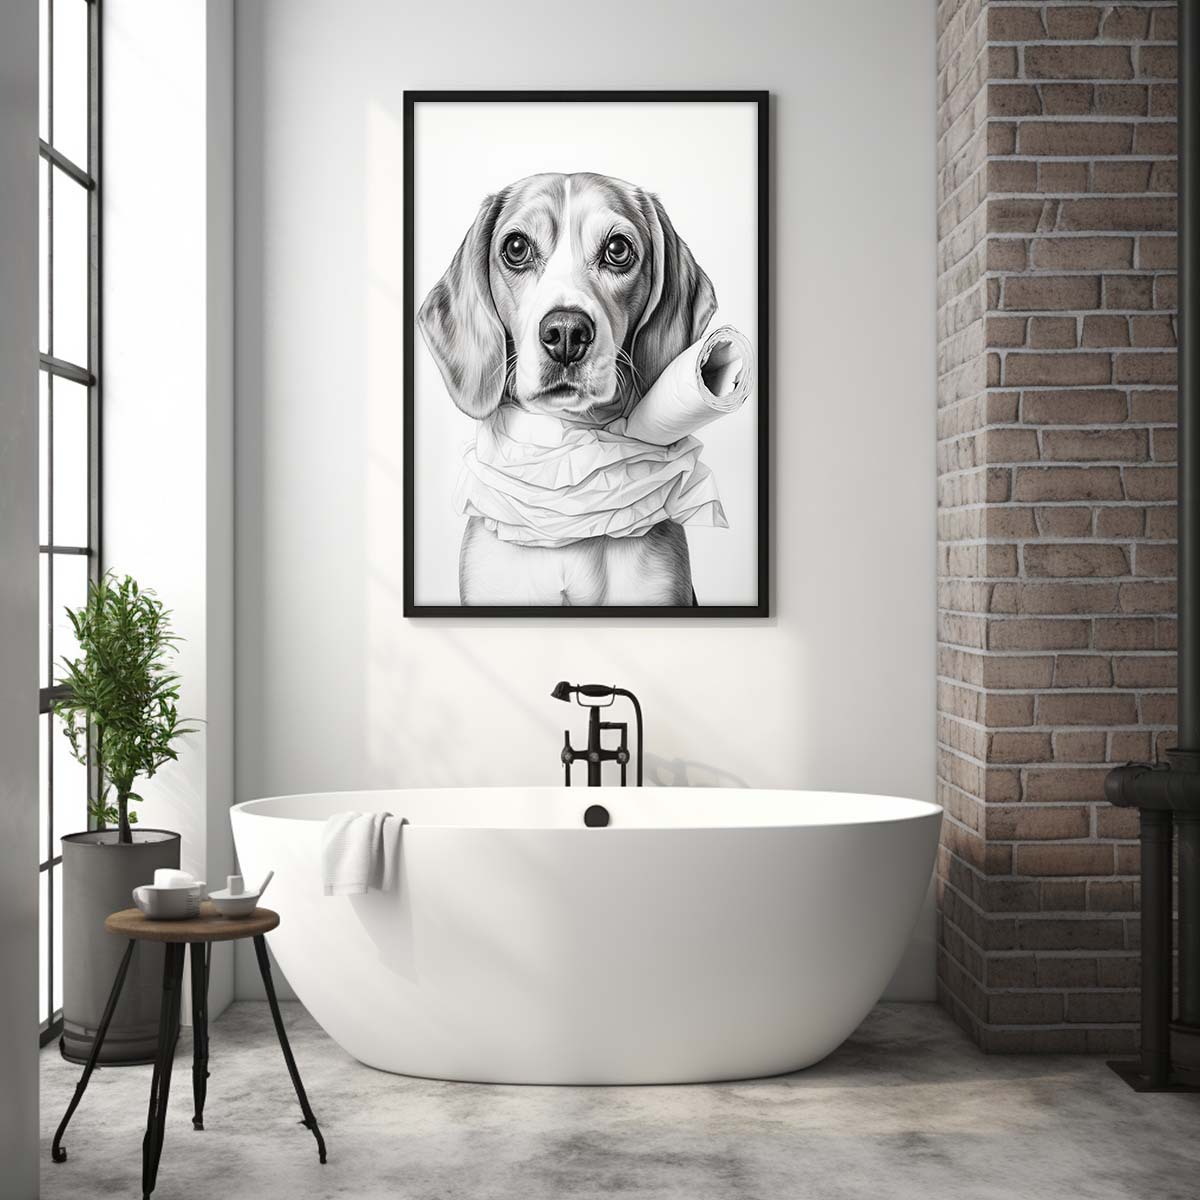 Beagle With Toilet Paper, Canvas Or Poster, Funny Dog Art, Bathroom Wall Decor, Home Decor, Bathroom Wall Art, Dog Wall Decor, Animal Decor, Pet Gift, Pet Illustration, Digital Download